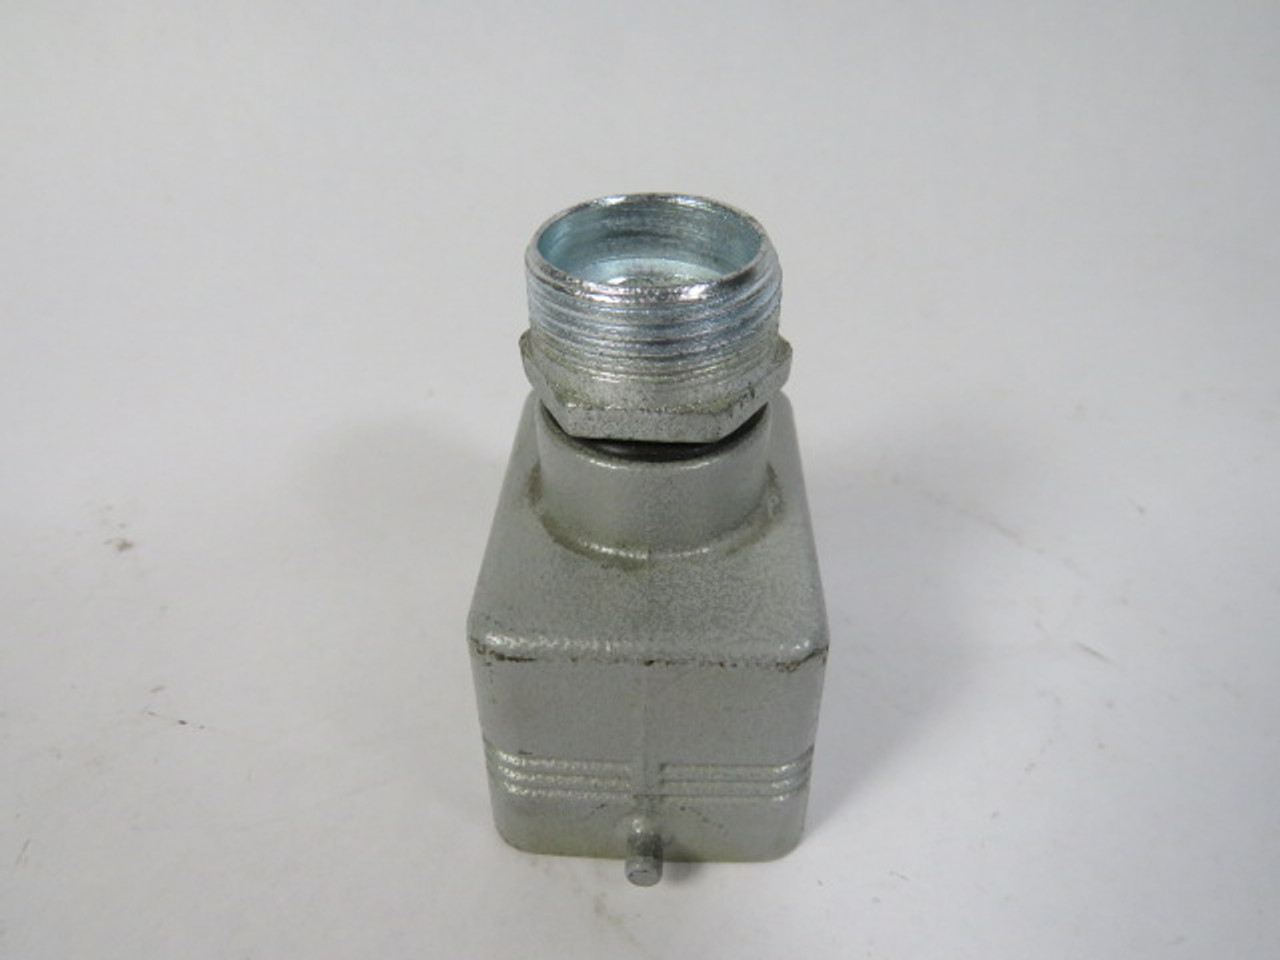 Ilme CHV06L13 Connector End Enclosure 44mmx27mm USED